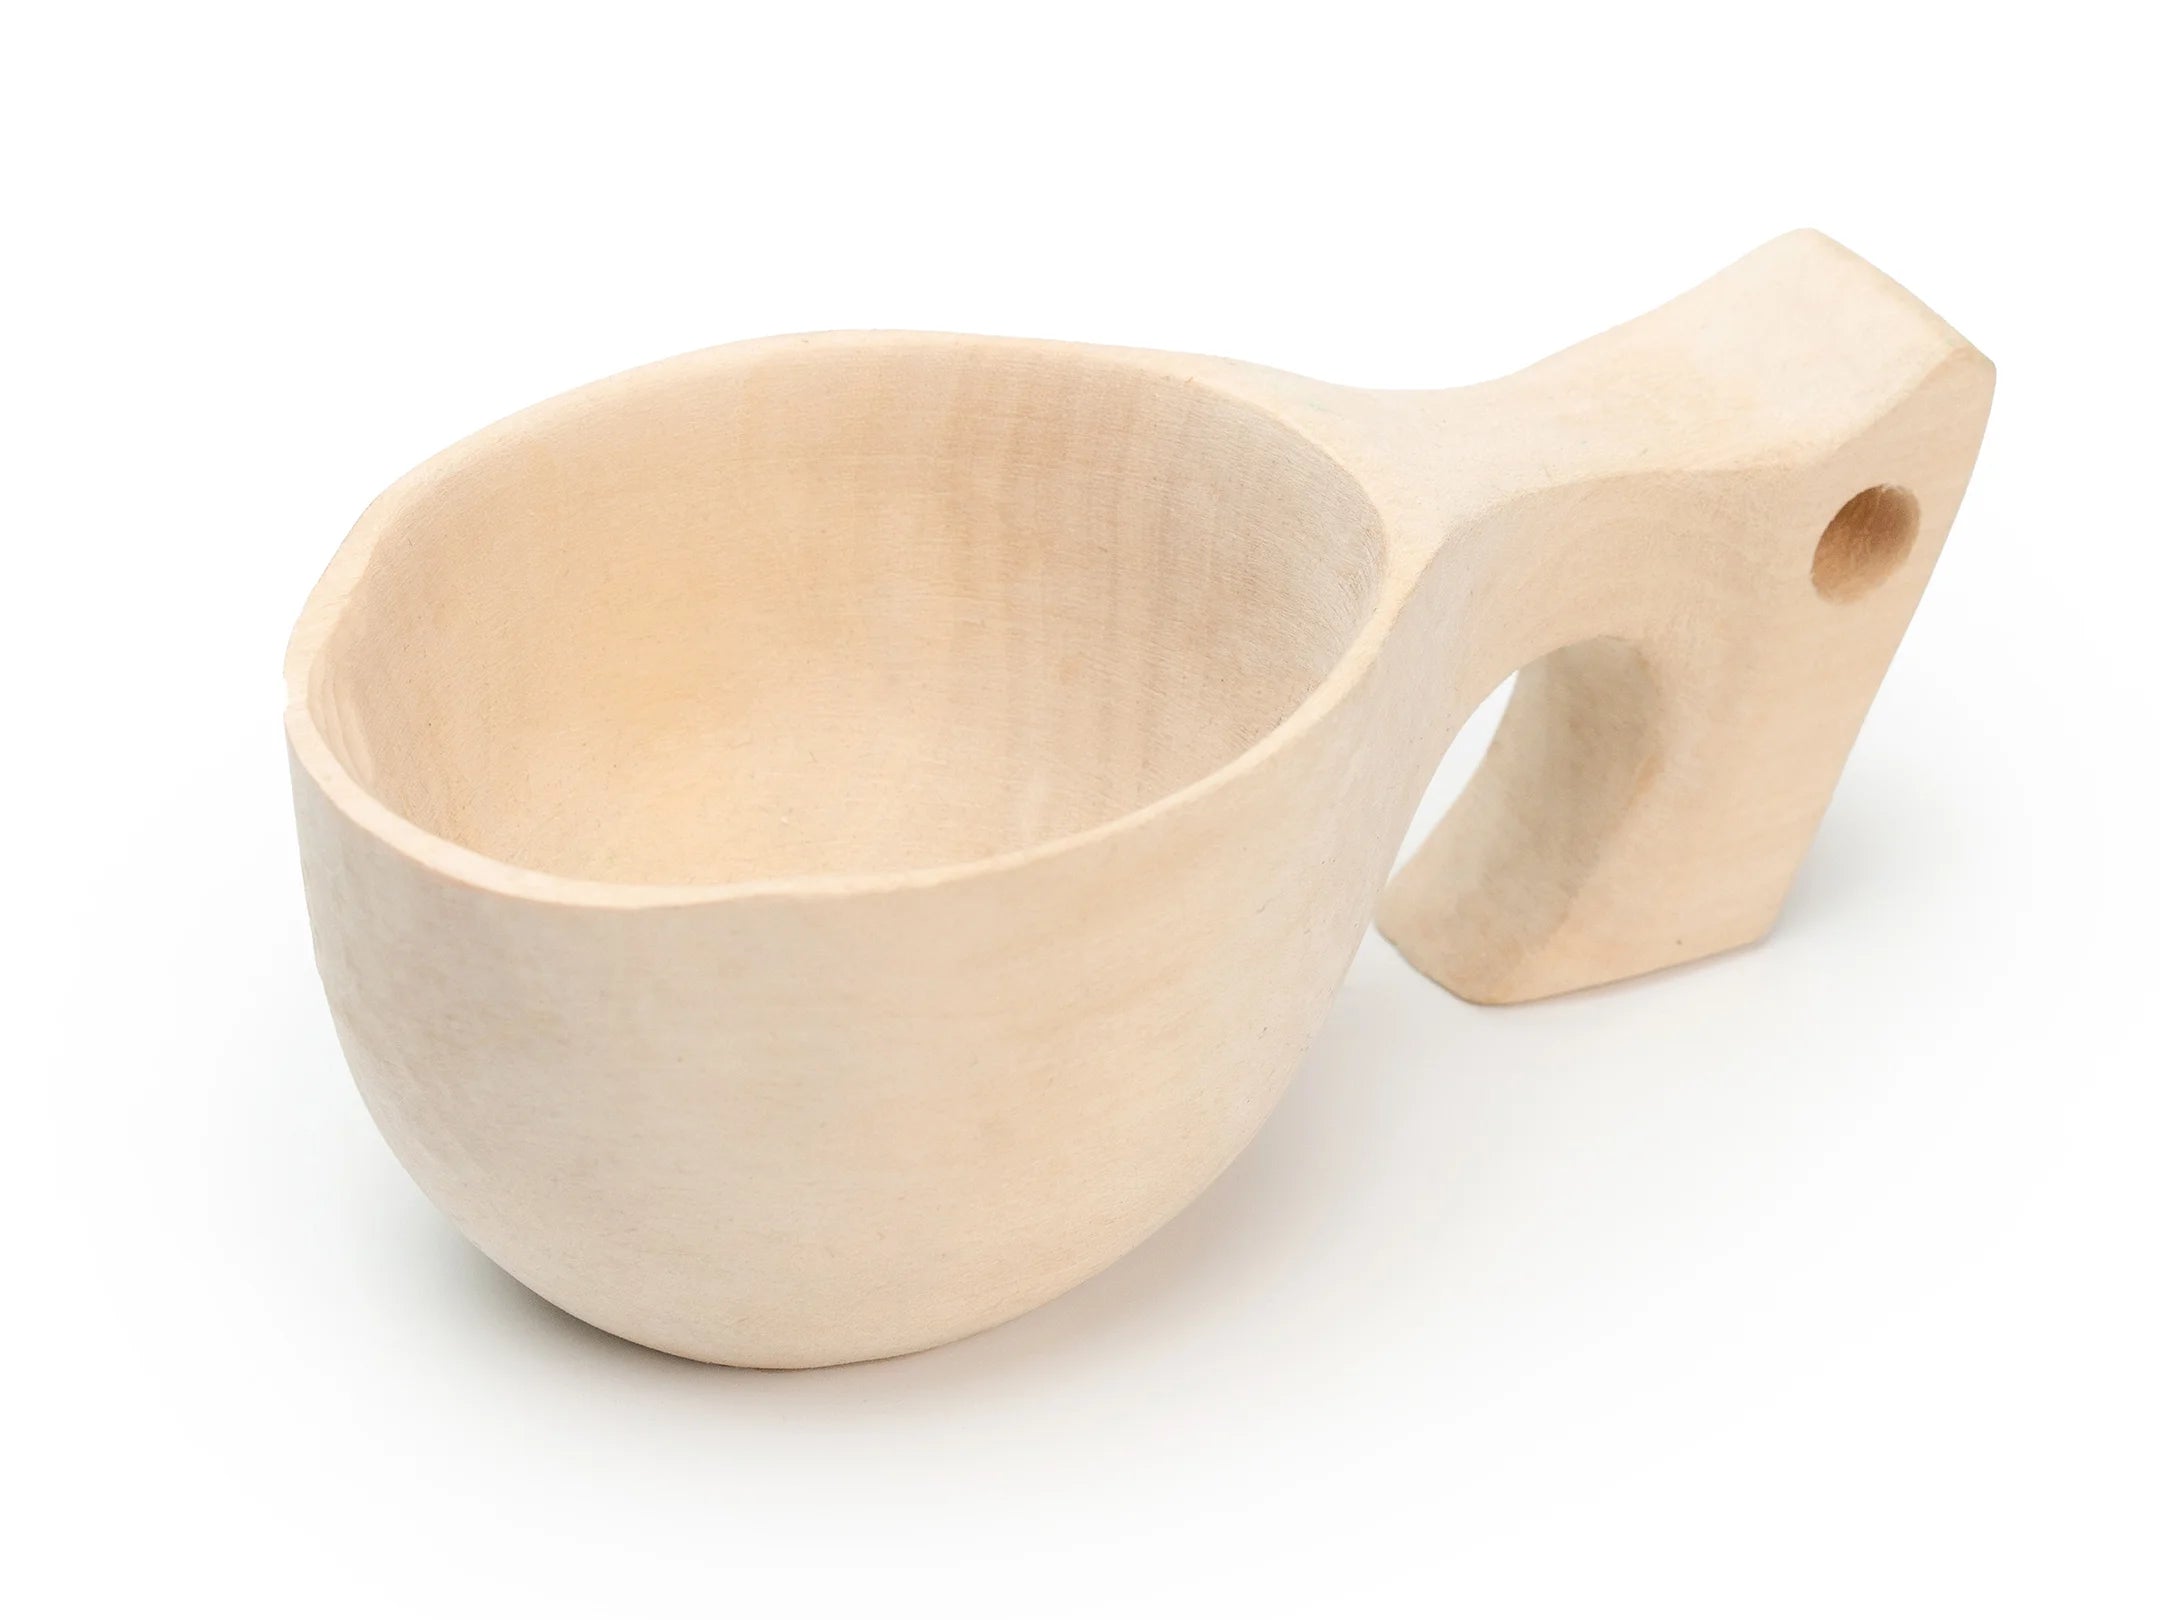 ③Making a wooden cup . Kuksa carving #woodworking 